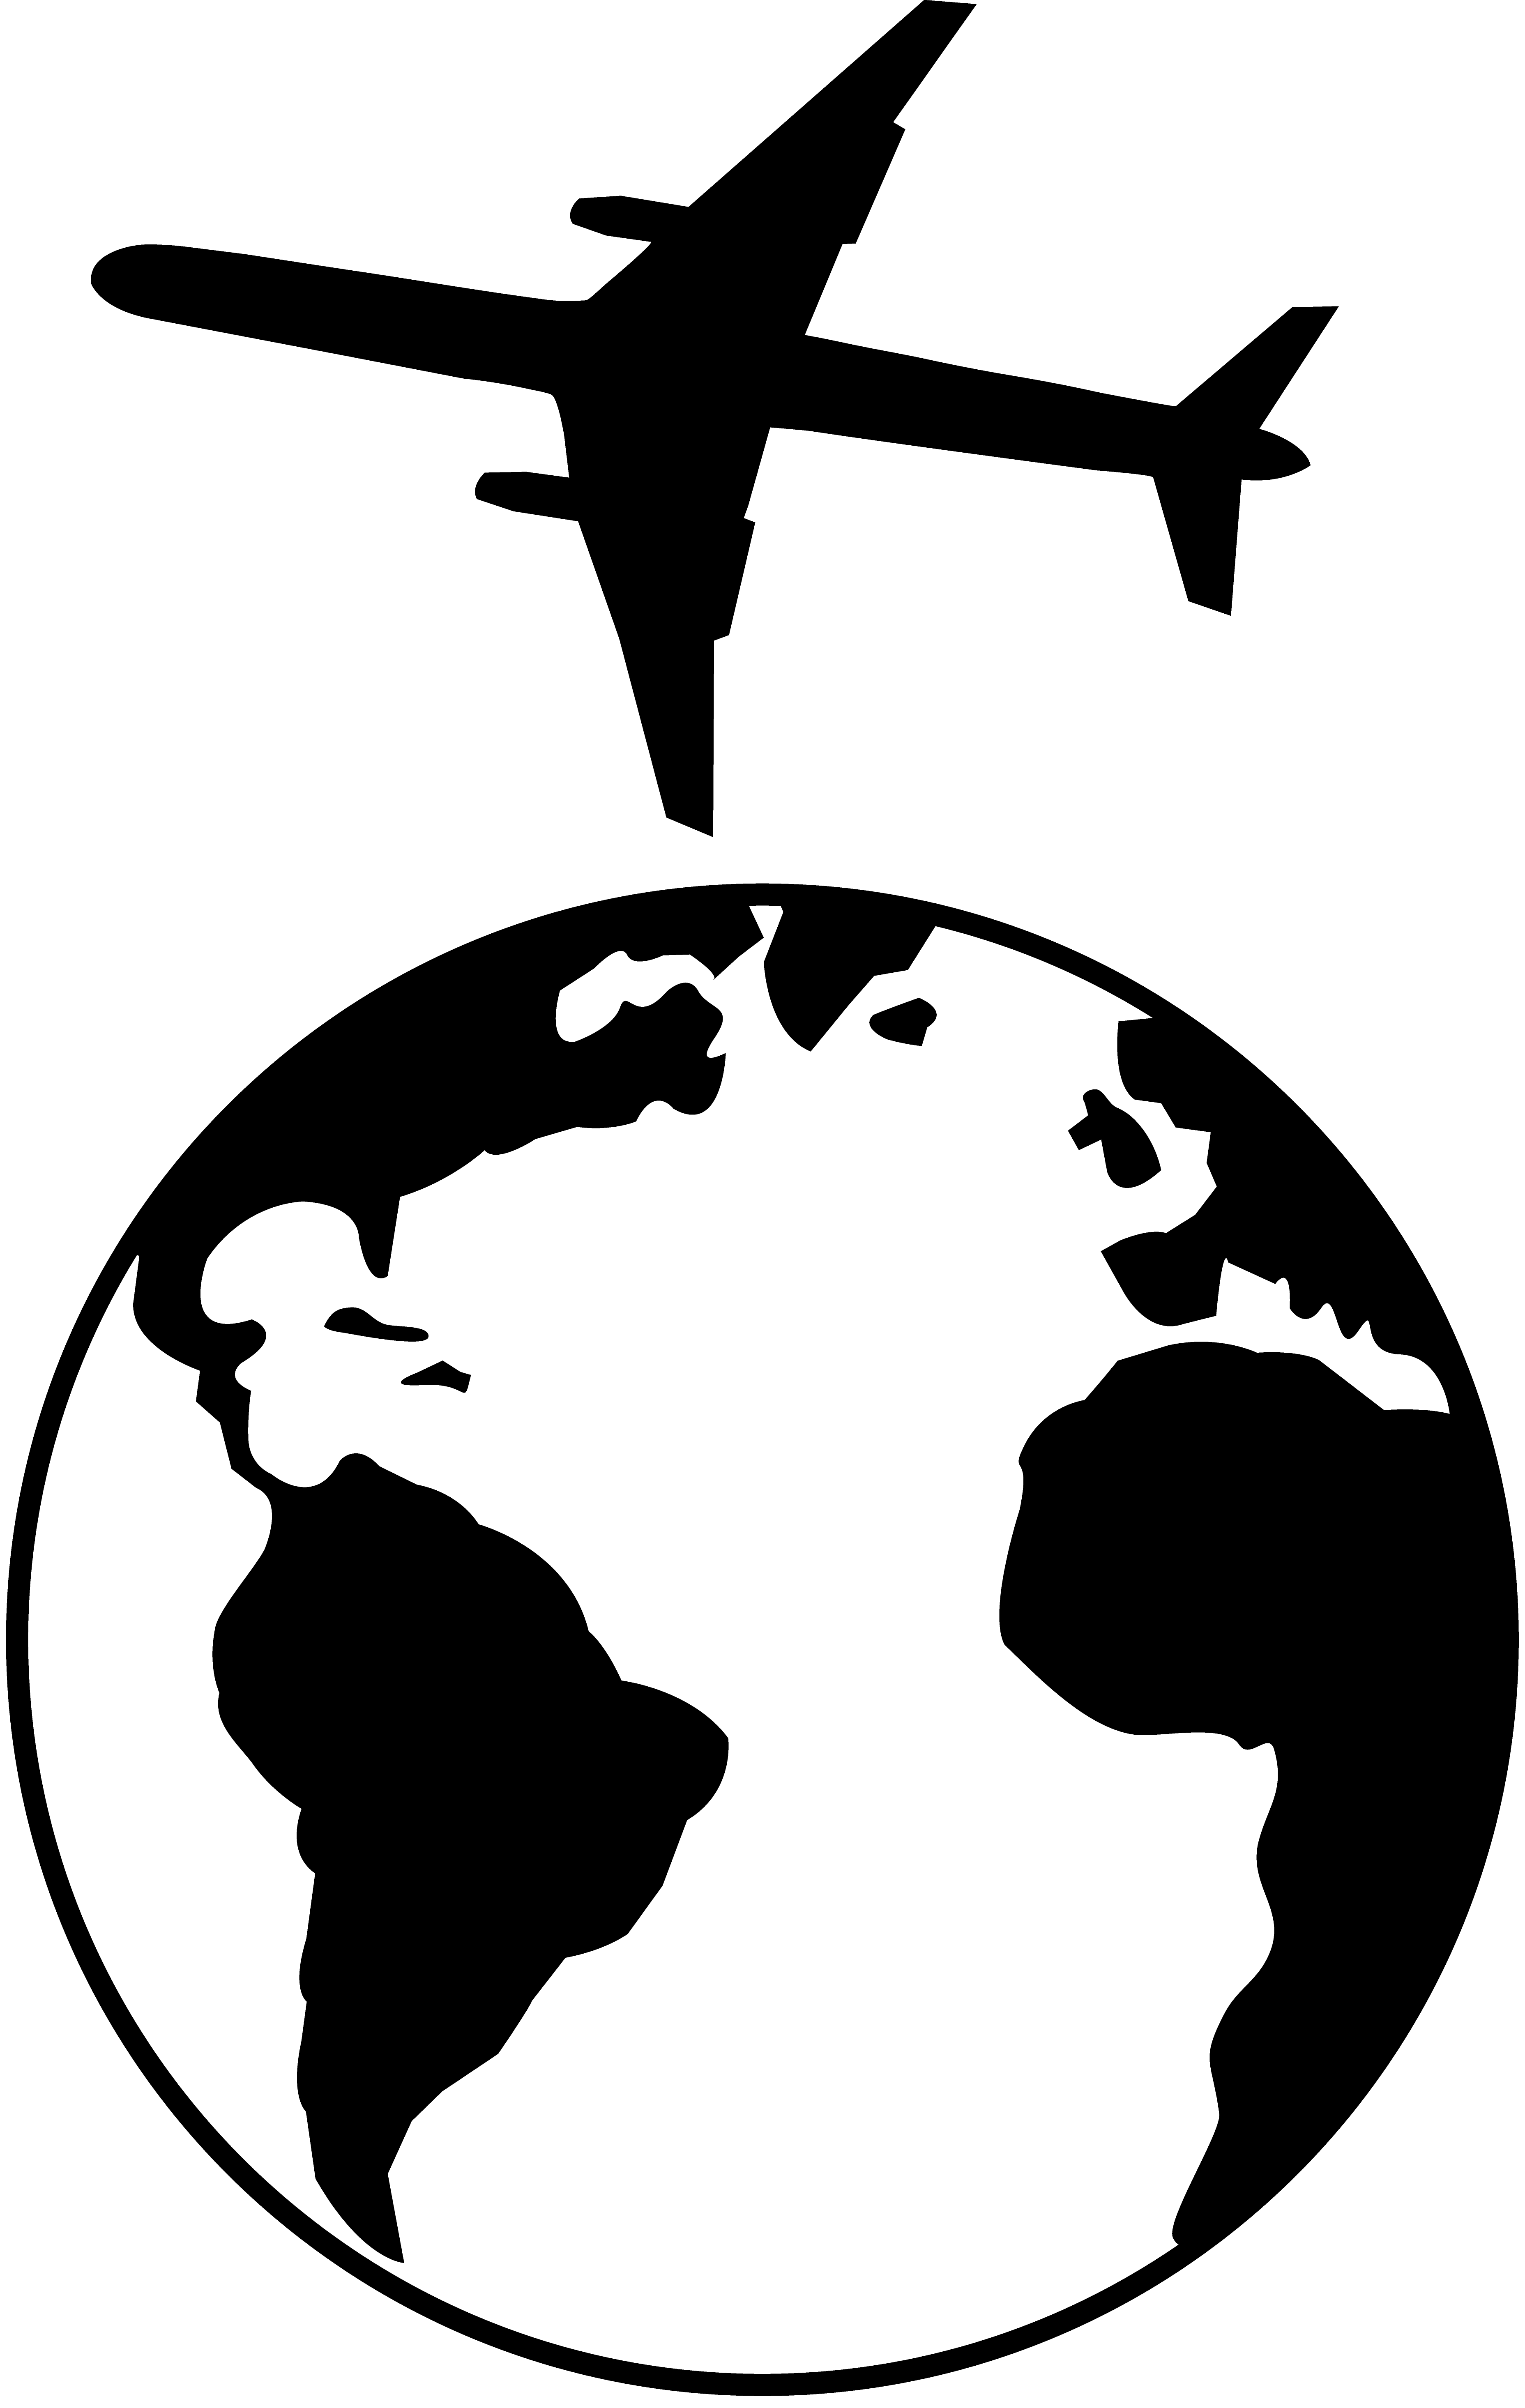 Geology clipart black and white. Airplane flying over earth